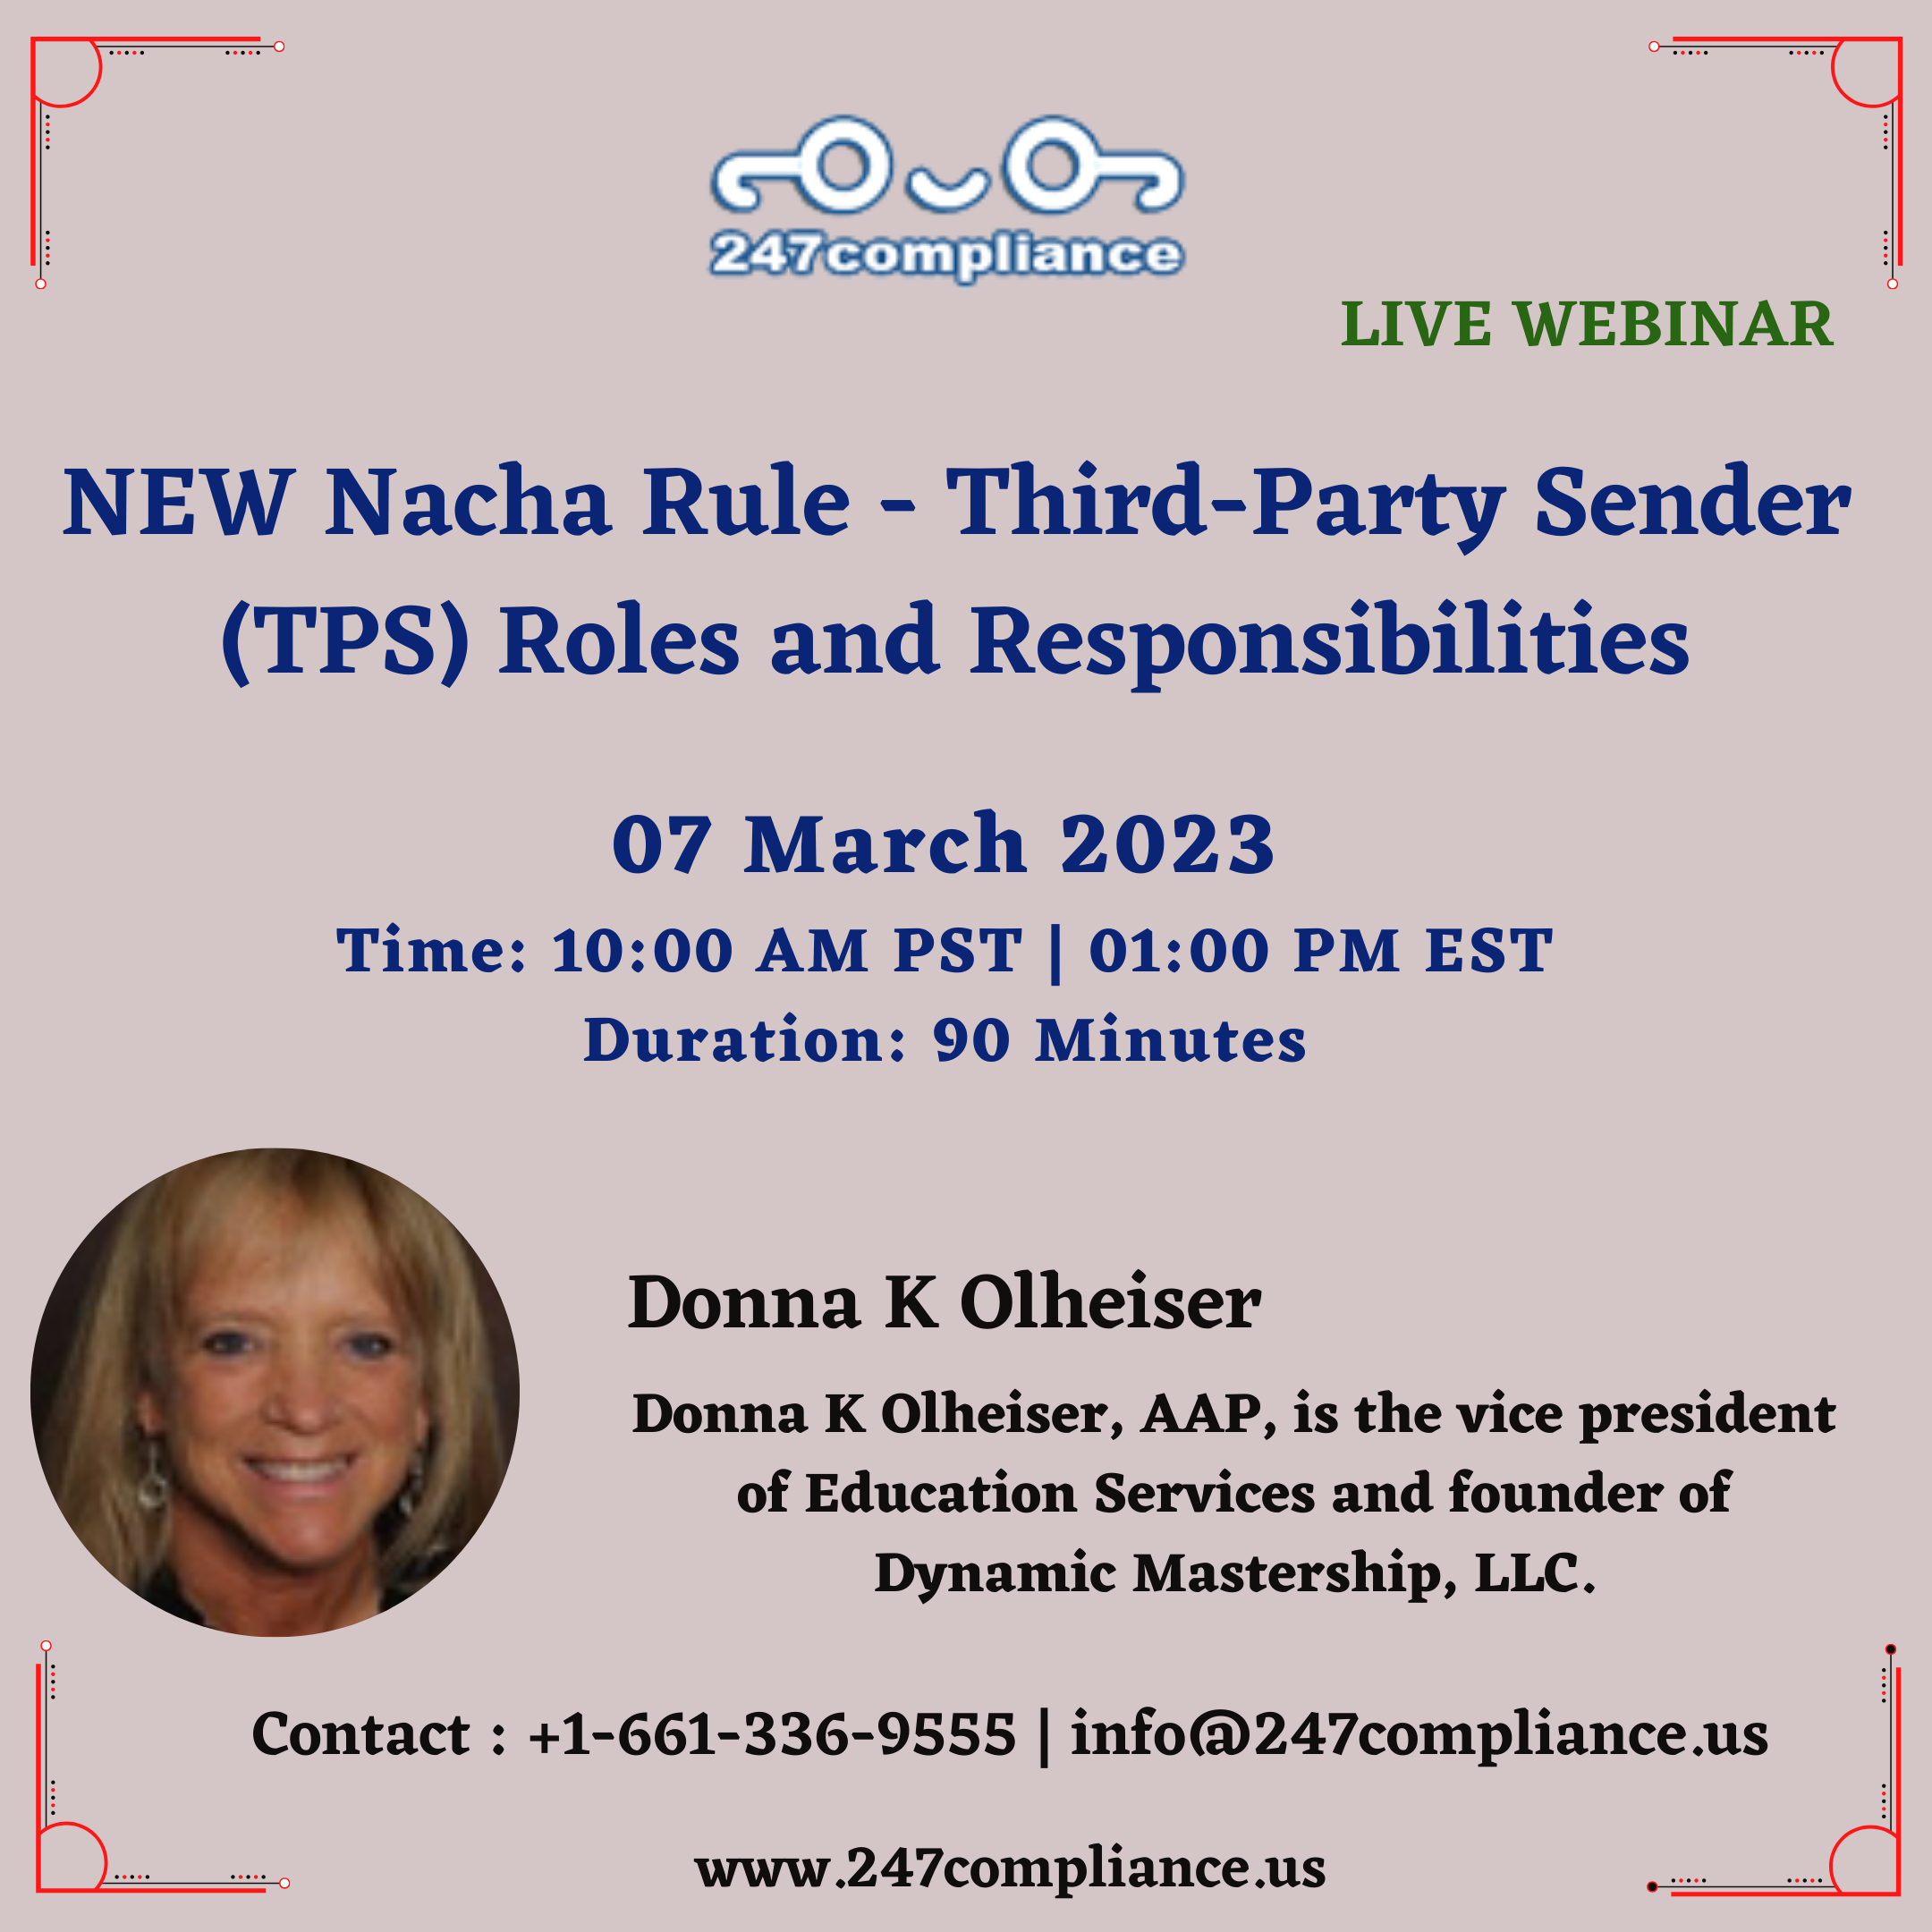 NEW Nacha Rule - Third-Party Sender (TPS) Roles and Responsibilities, Online Event